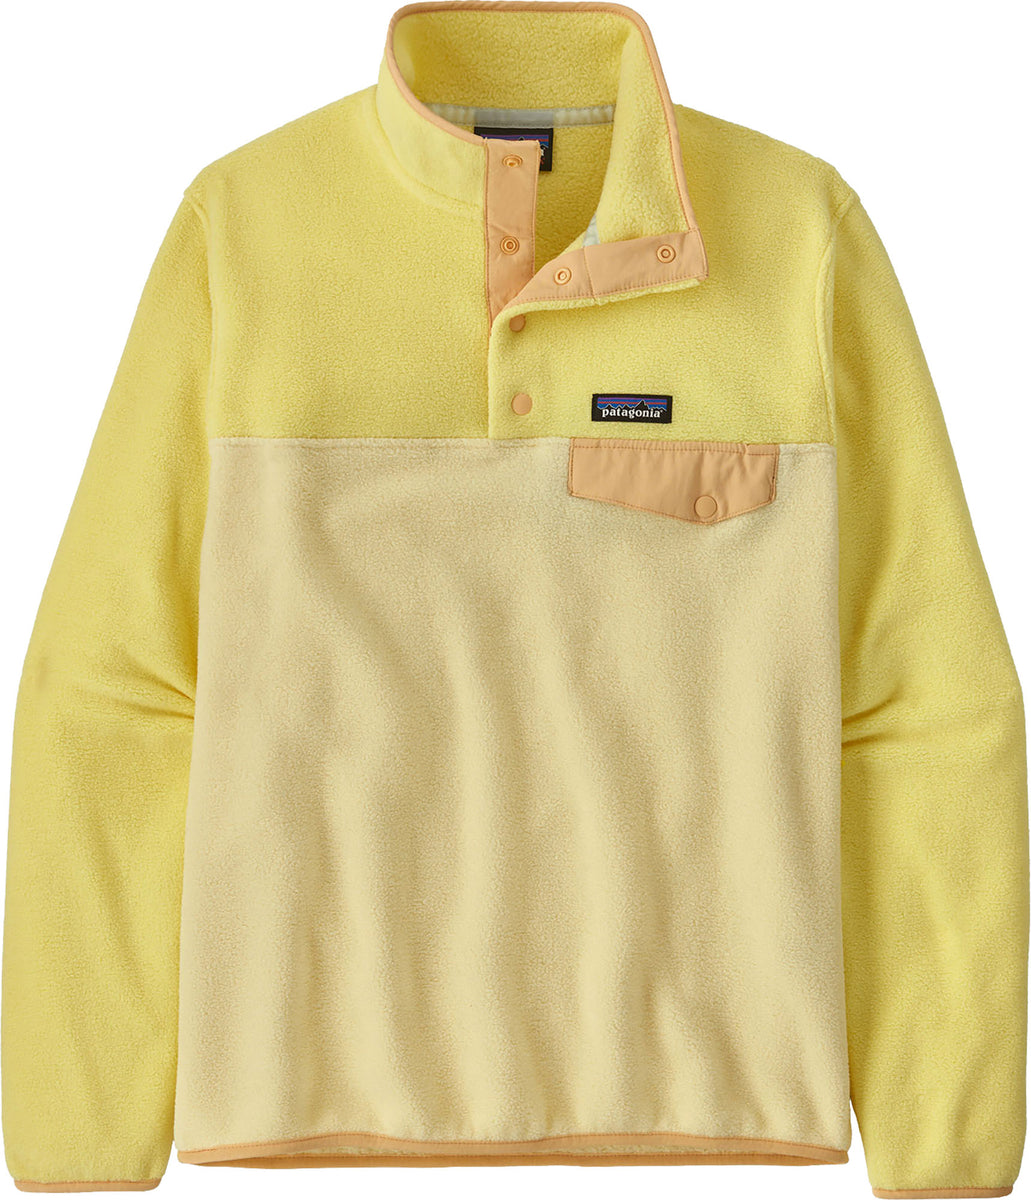 Women's Crewneck Spring Pullover Sweater - A New Day™ Yellow XL